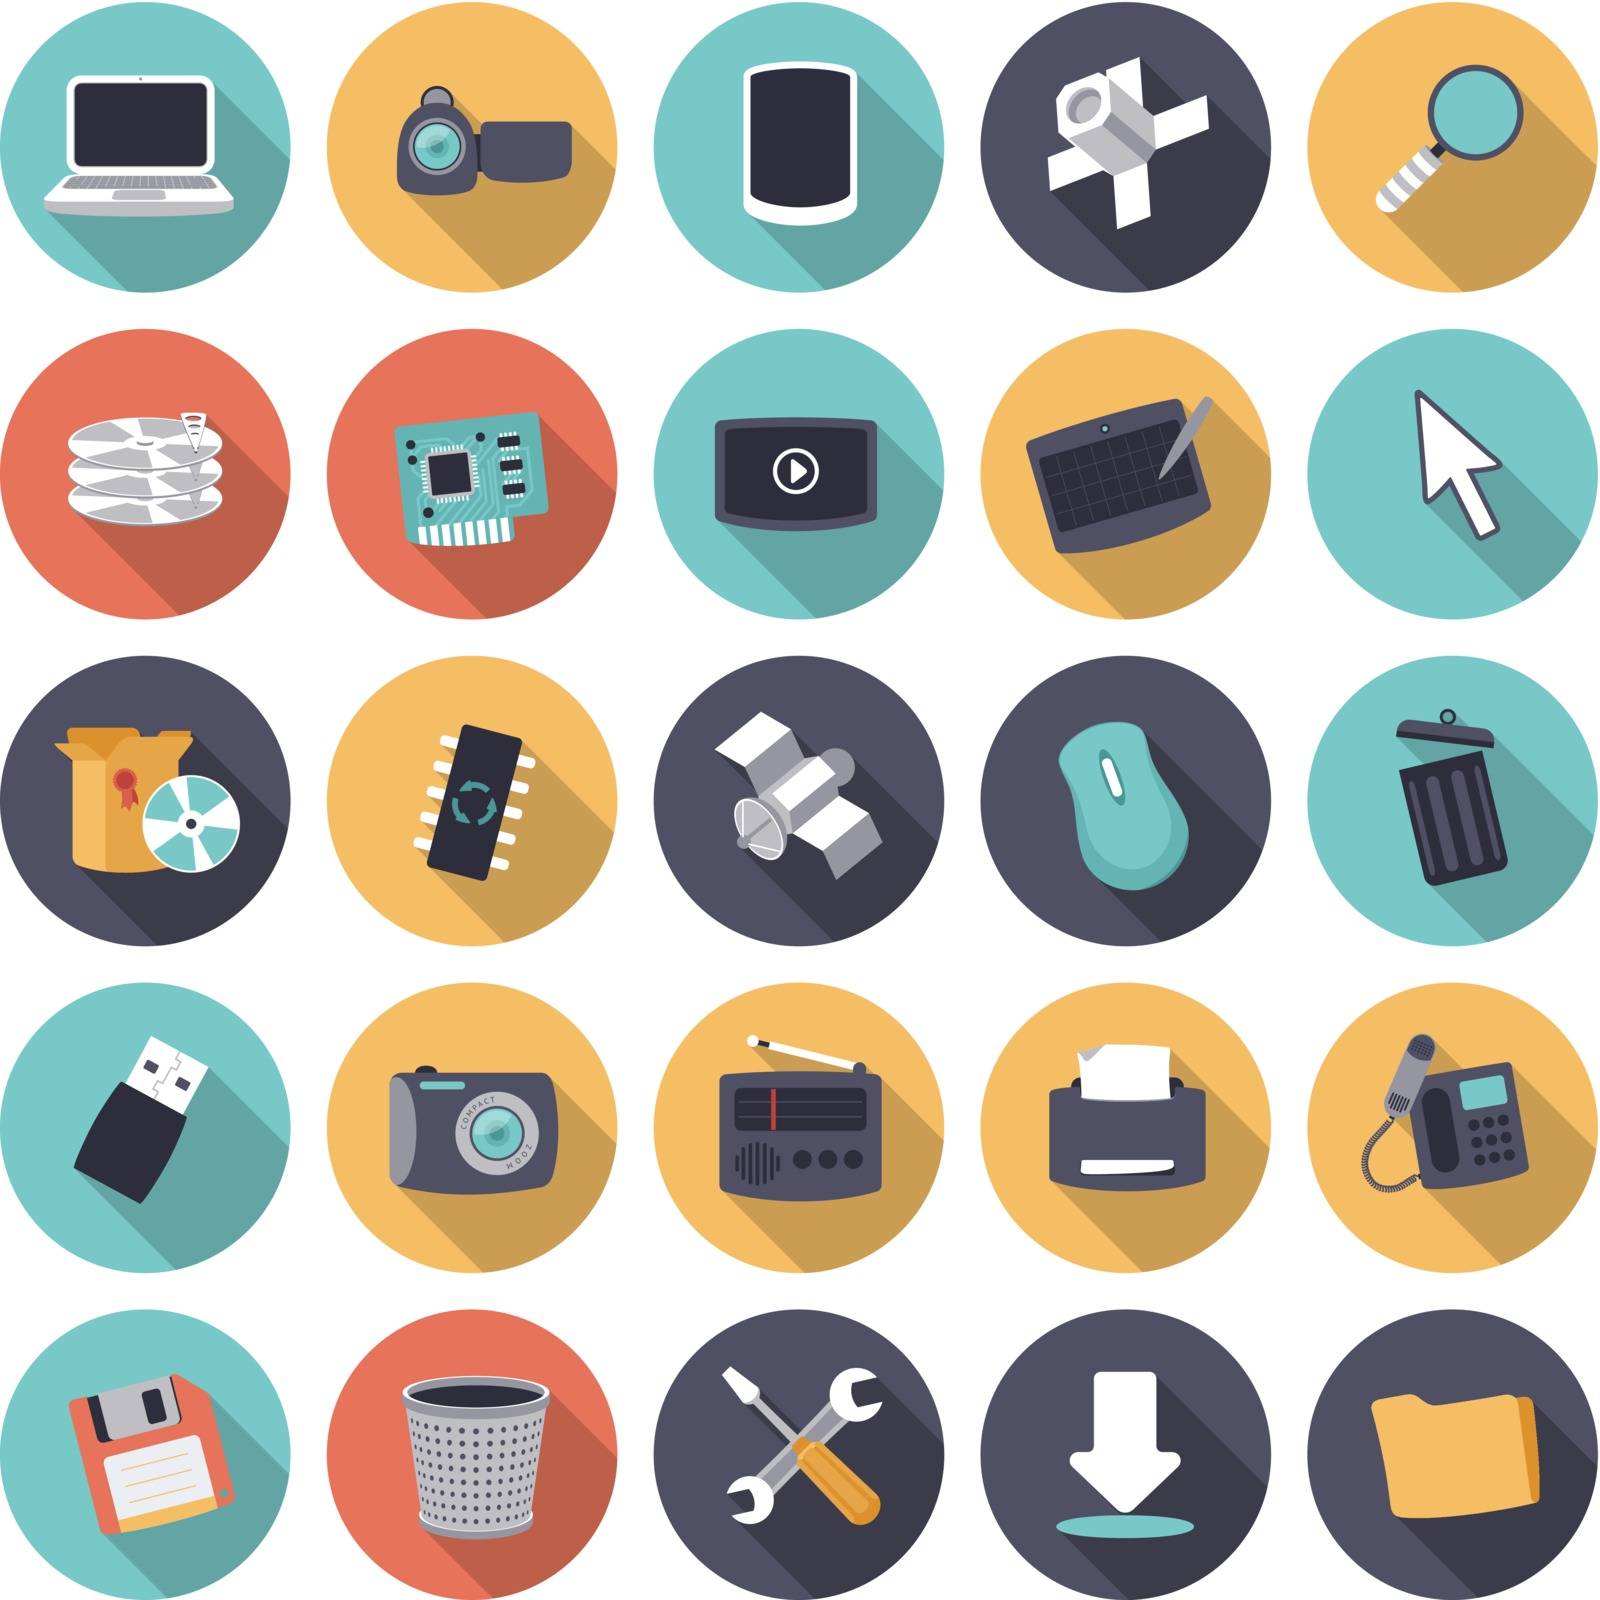 Flat design icons for technology and devices. Vector eps10 with transparency.